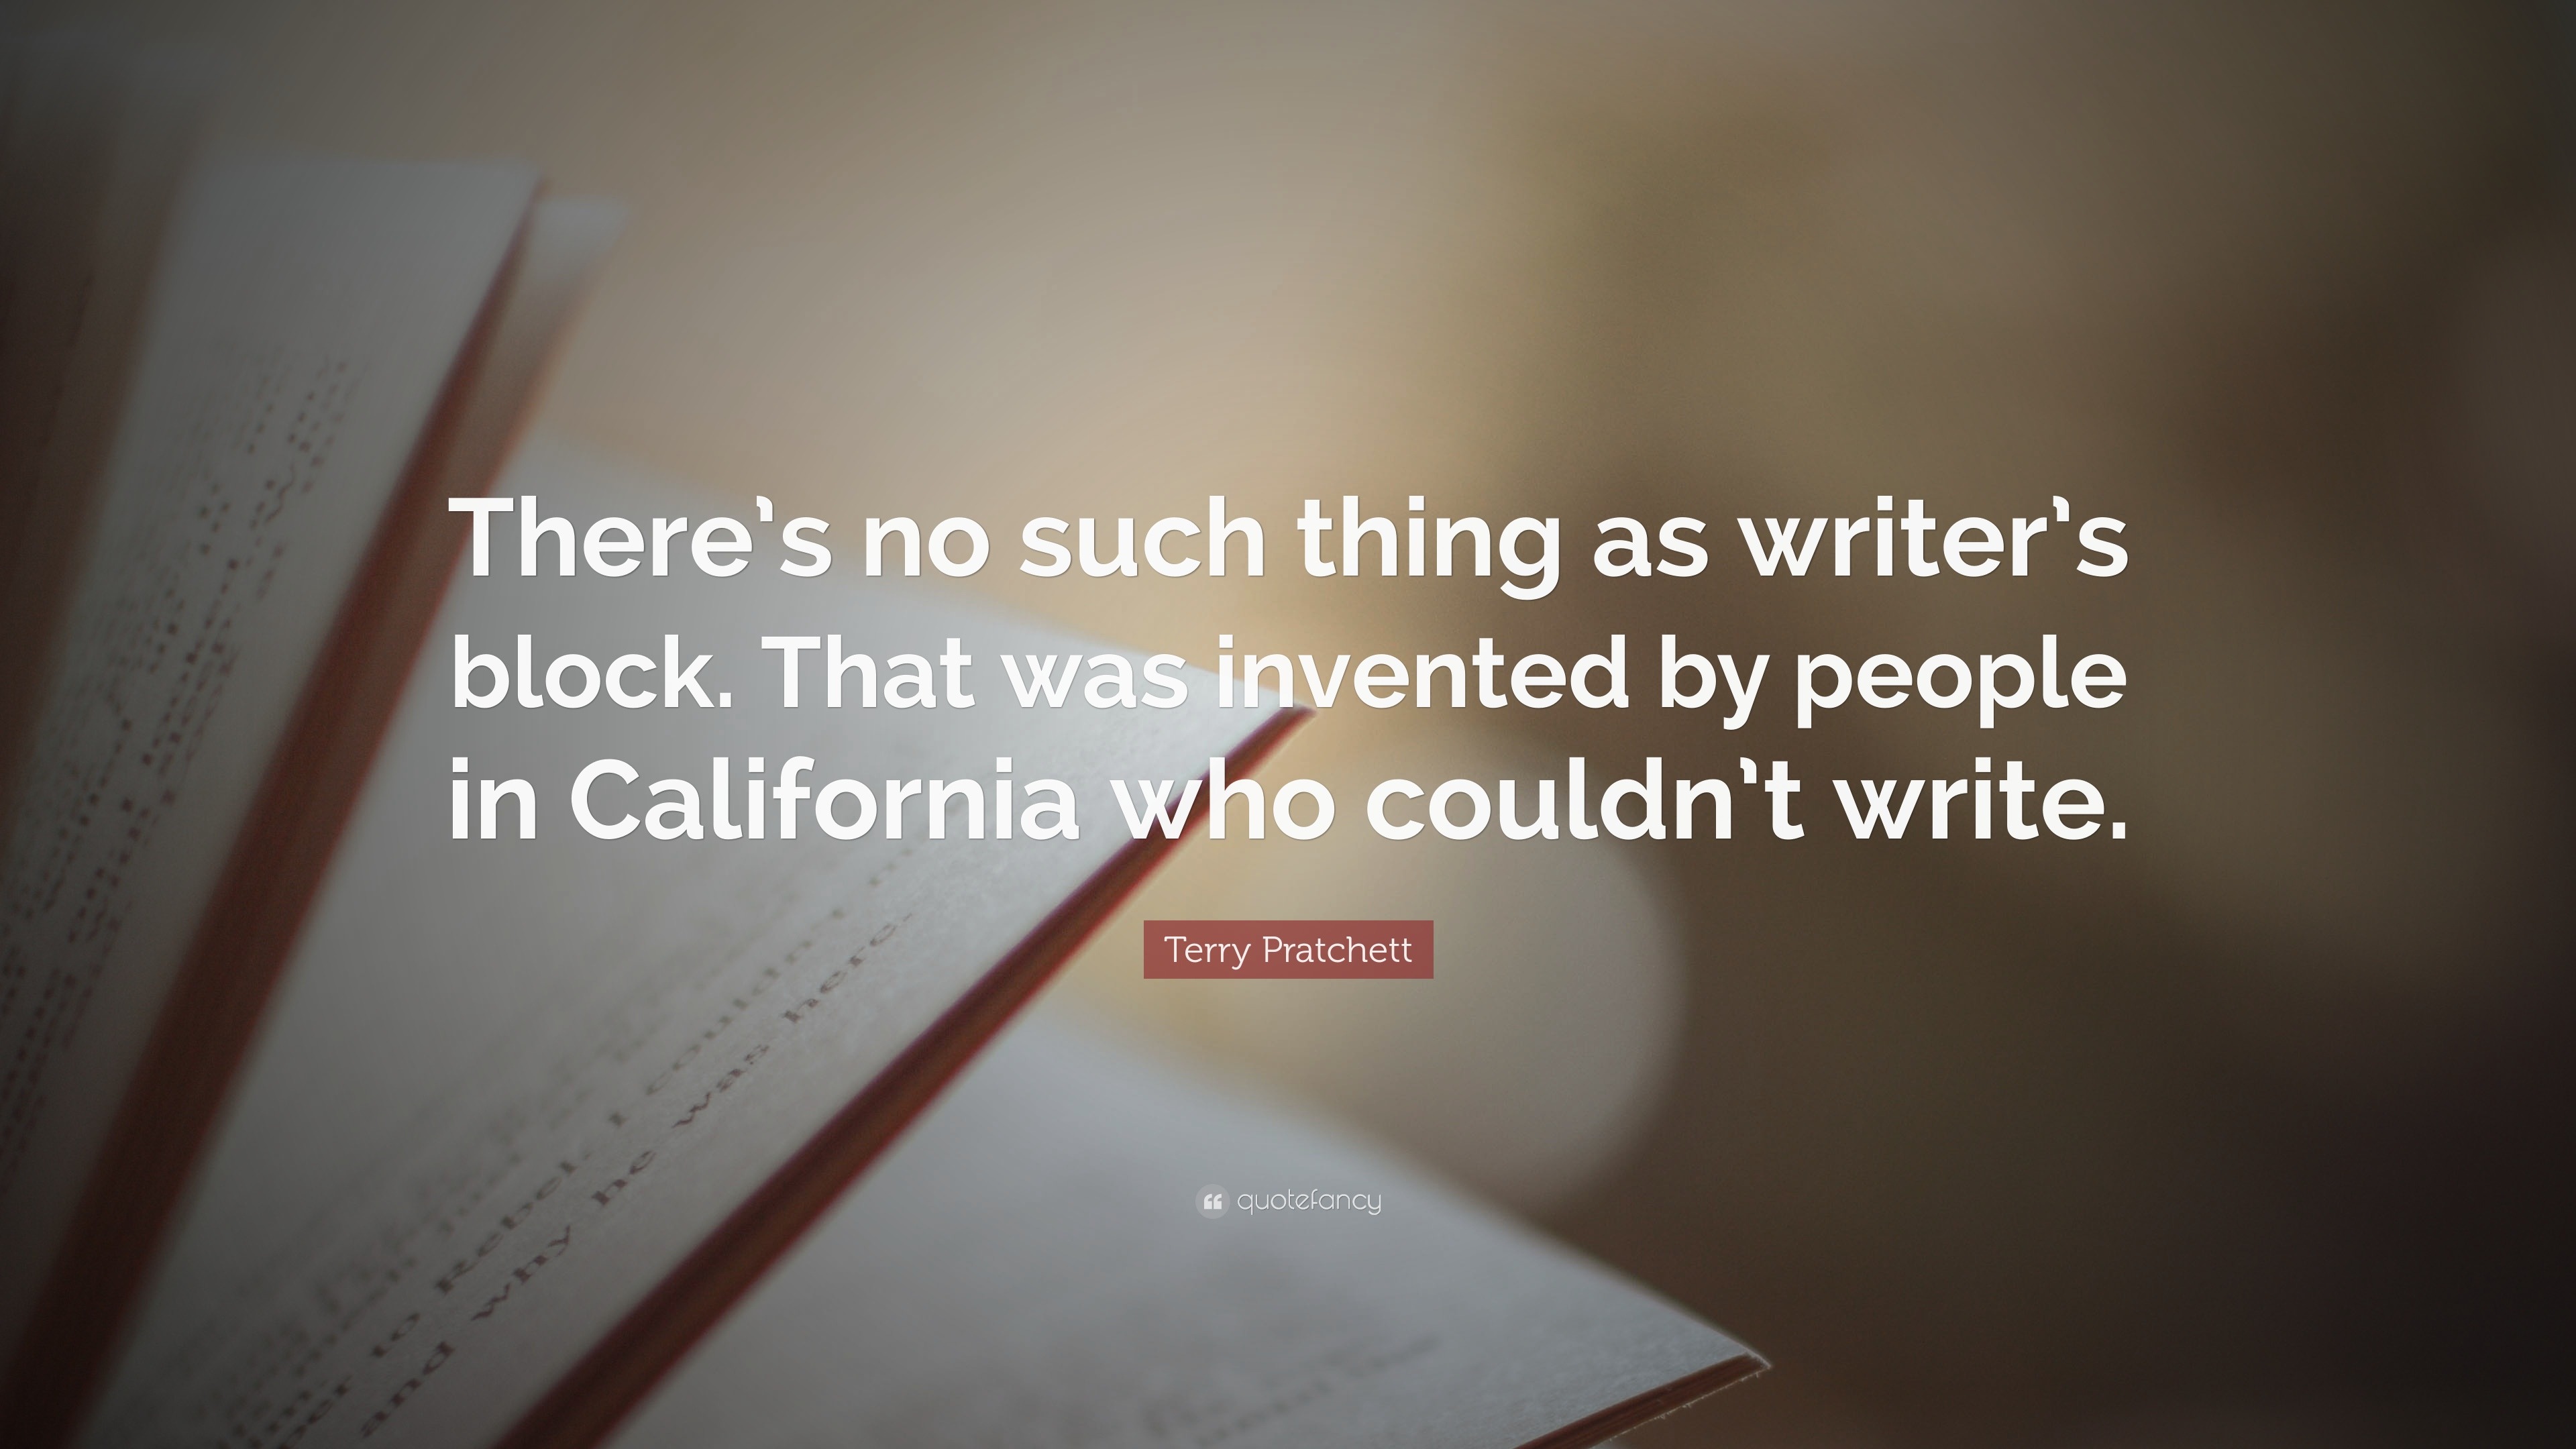 Terry Pratchett Quote: “There's no such thing as writer's block ...